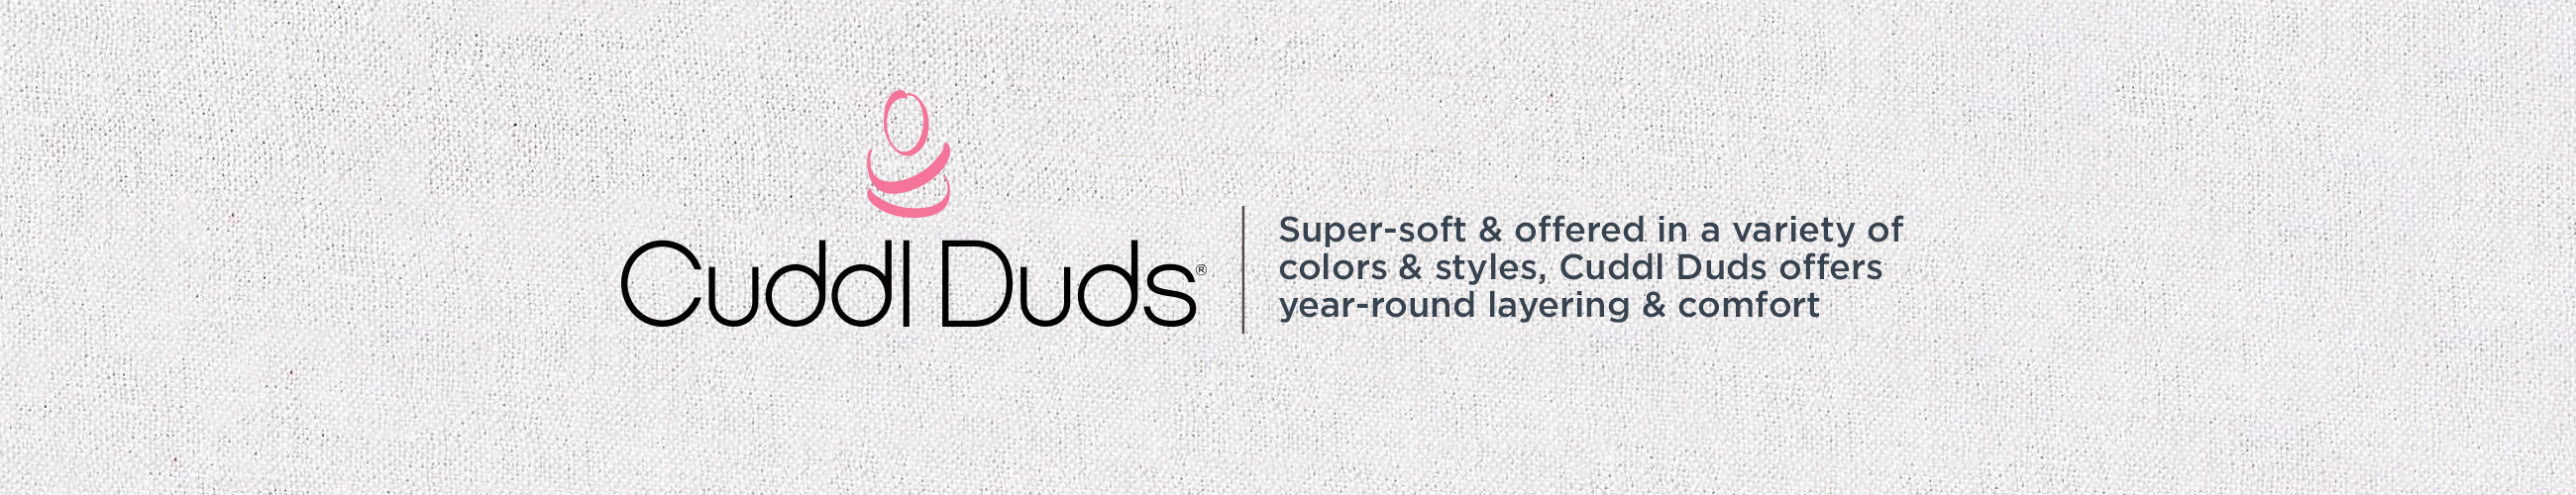 Cuddl Duds - Super-soft & offered in a variety of colors & styles, Cuddl Duds offers year-round layering & comfort